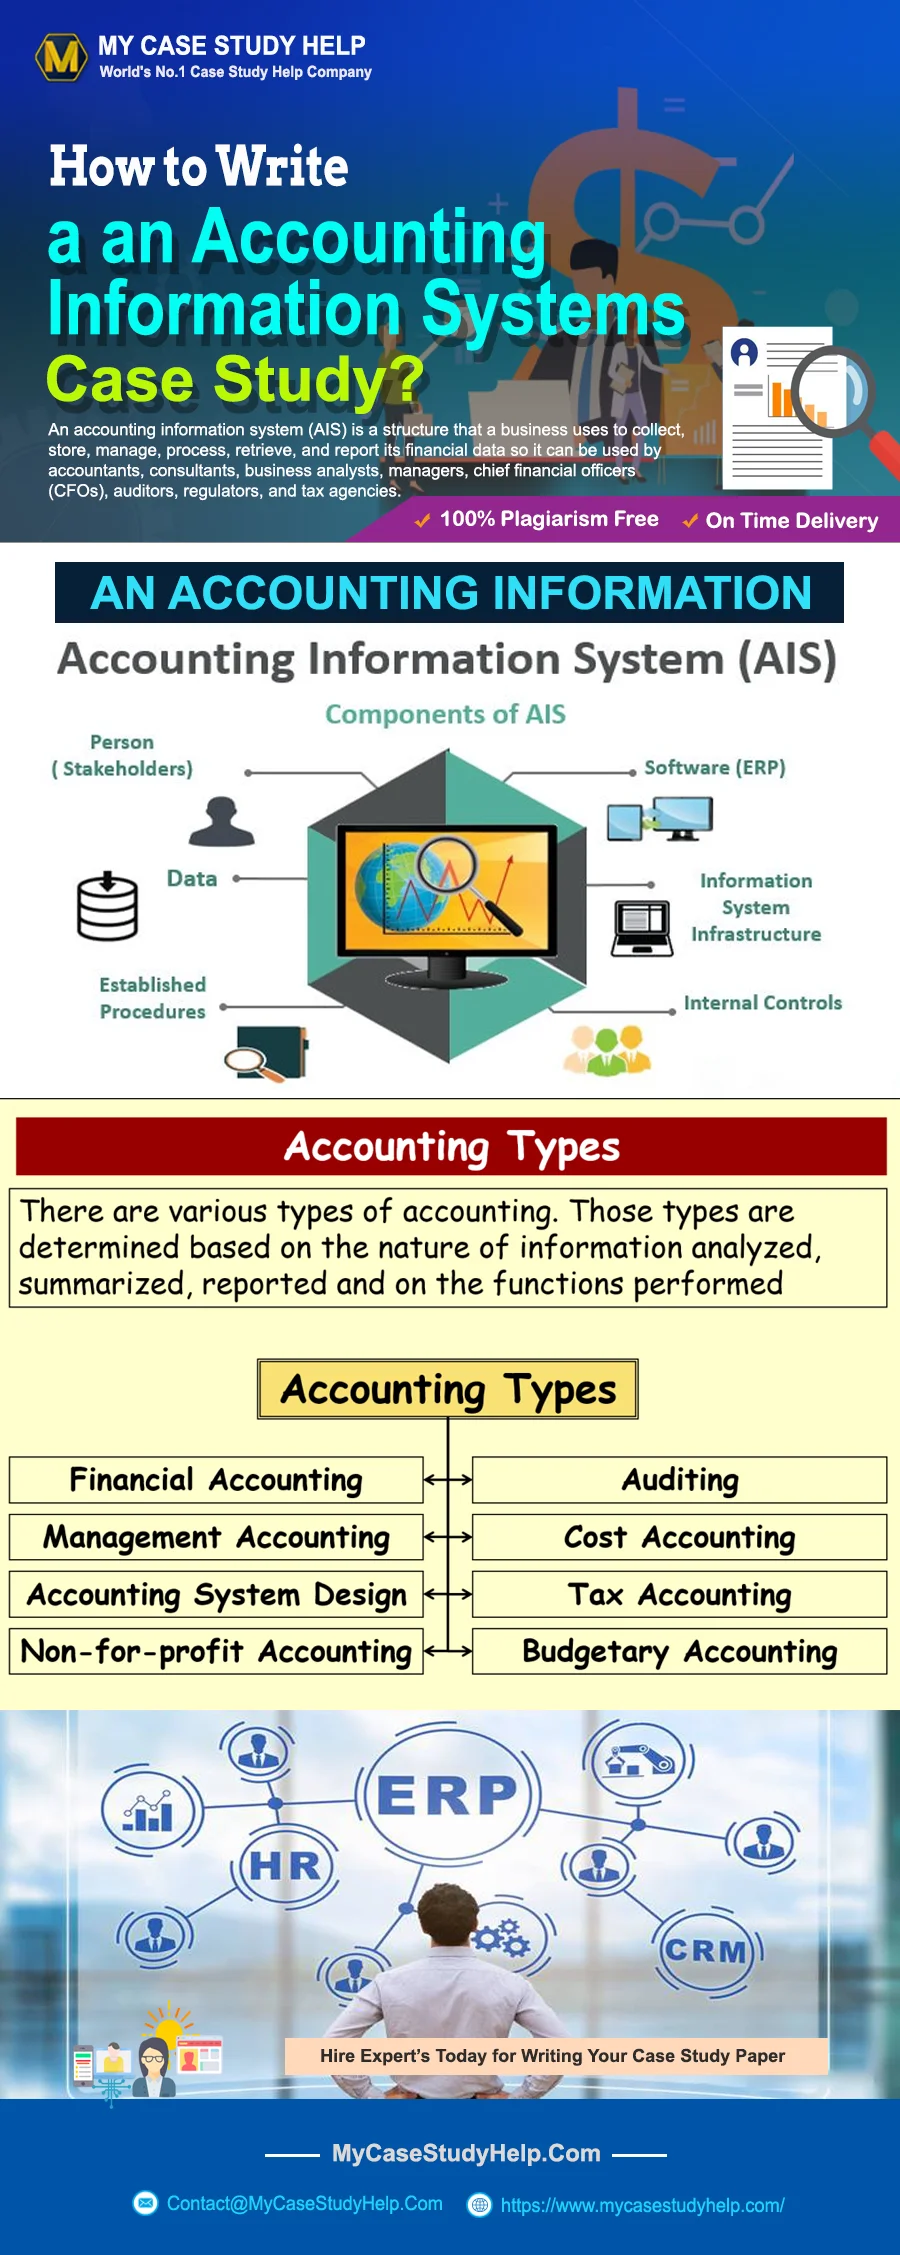 How To Write An Accounting Information System Case Study?